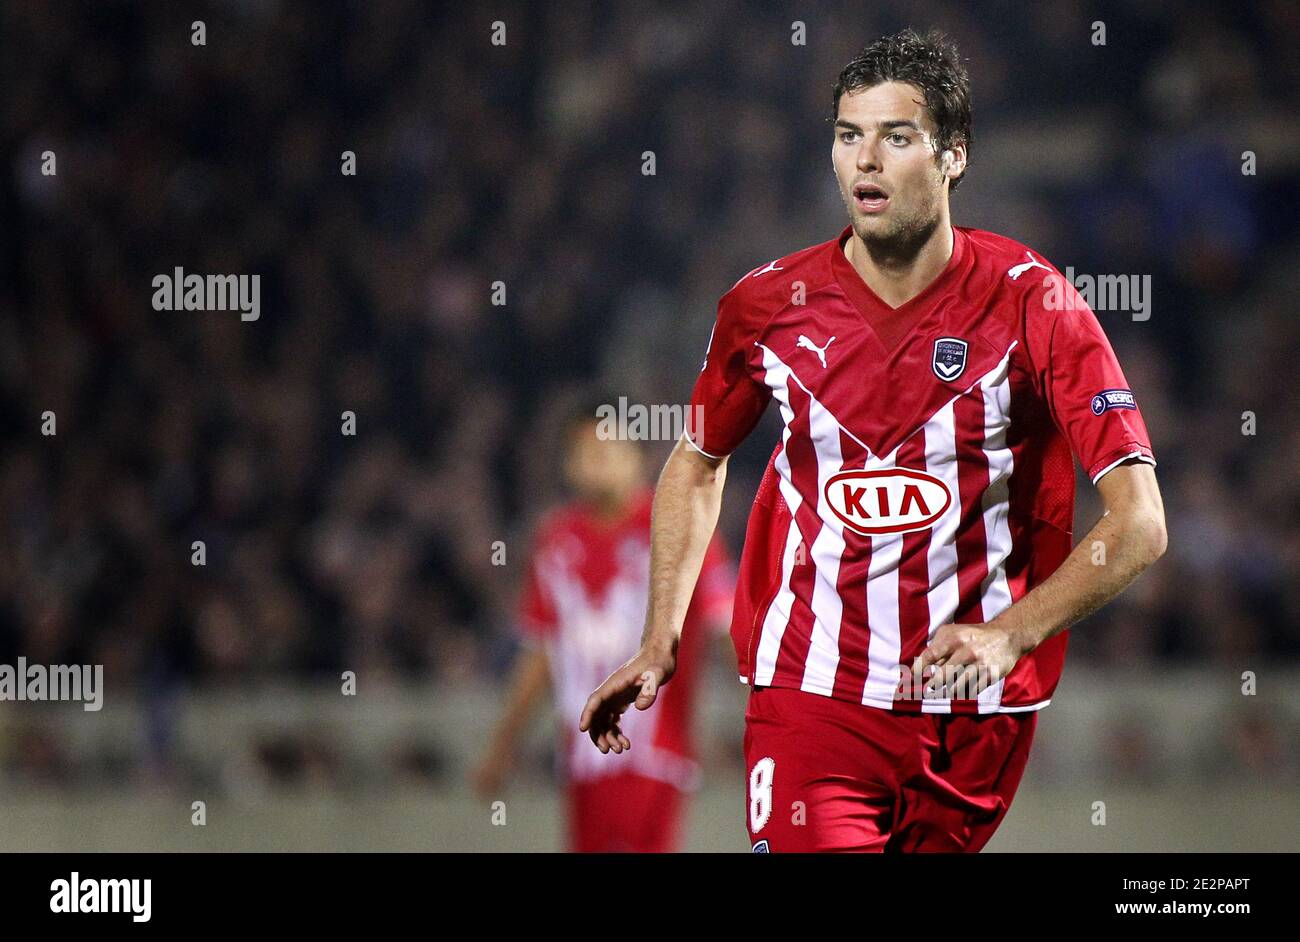 Bordeaux's Yoann Gourcuff during the UEFA Champions League Soccer match,  Round of 16, Second Leg, Girondins de Bordeaux vs Olympiakos, at the  Chaban-Delmas stadium, in Bordeaux, France. Bordeaux squeezed into the  Champions